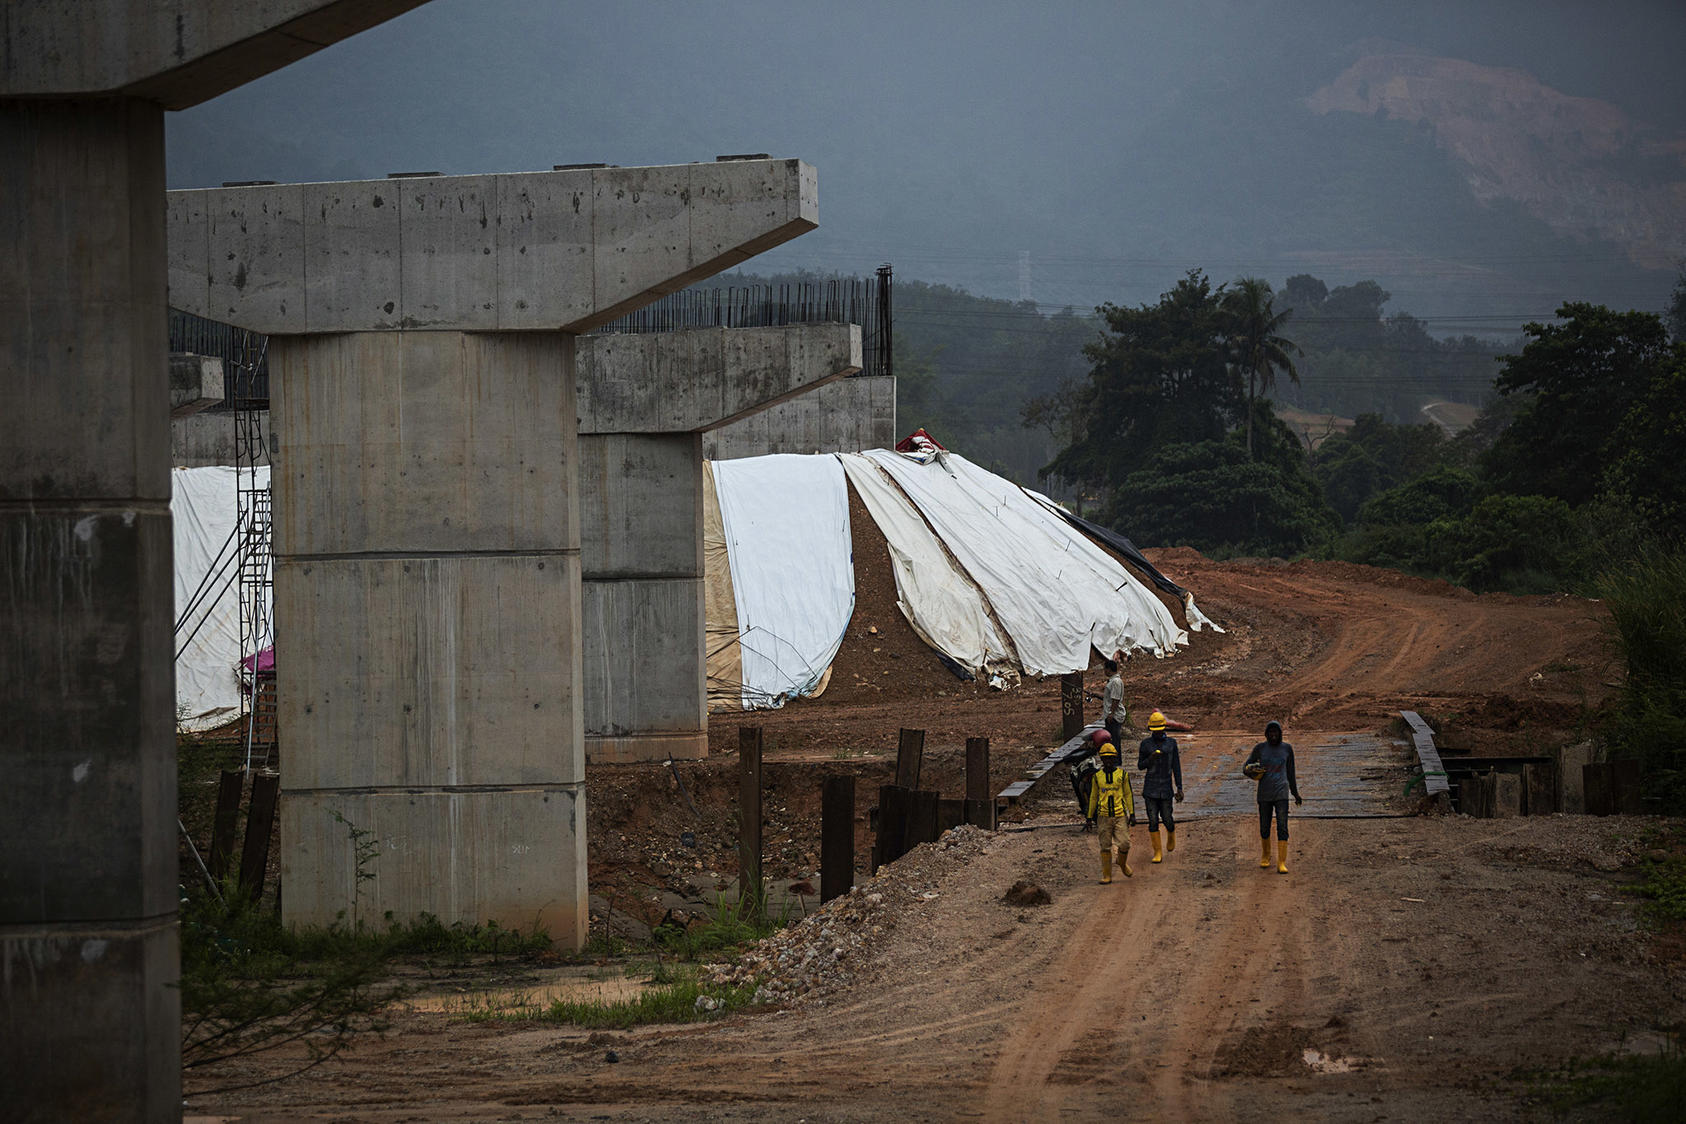 Construction on the East Coast Rail Link project, part of China's Belt and Road Initiative, in Bentong, Malaysia, Nov. 17, 2018. (New York Times)